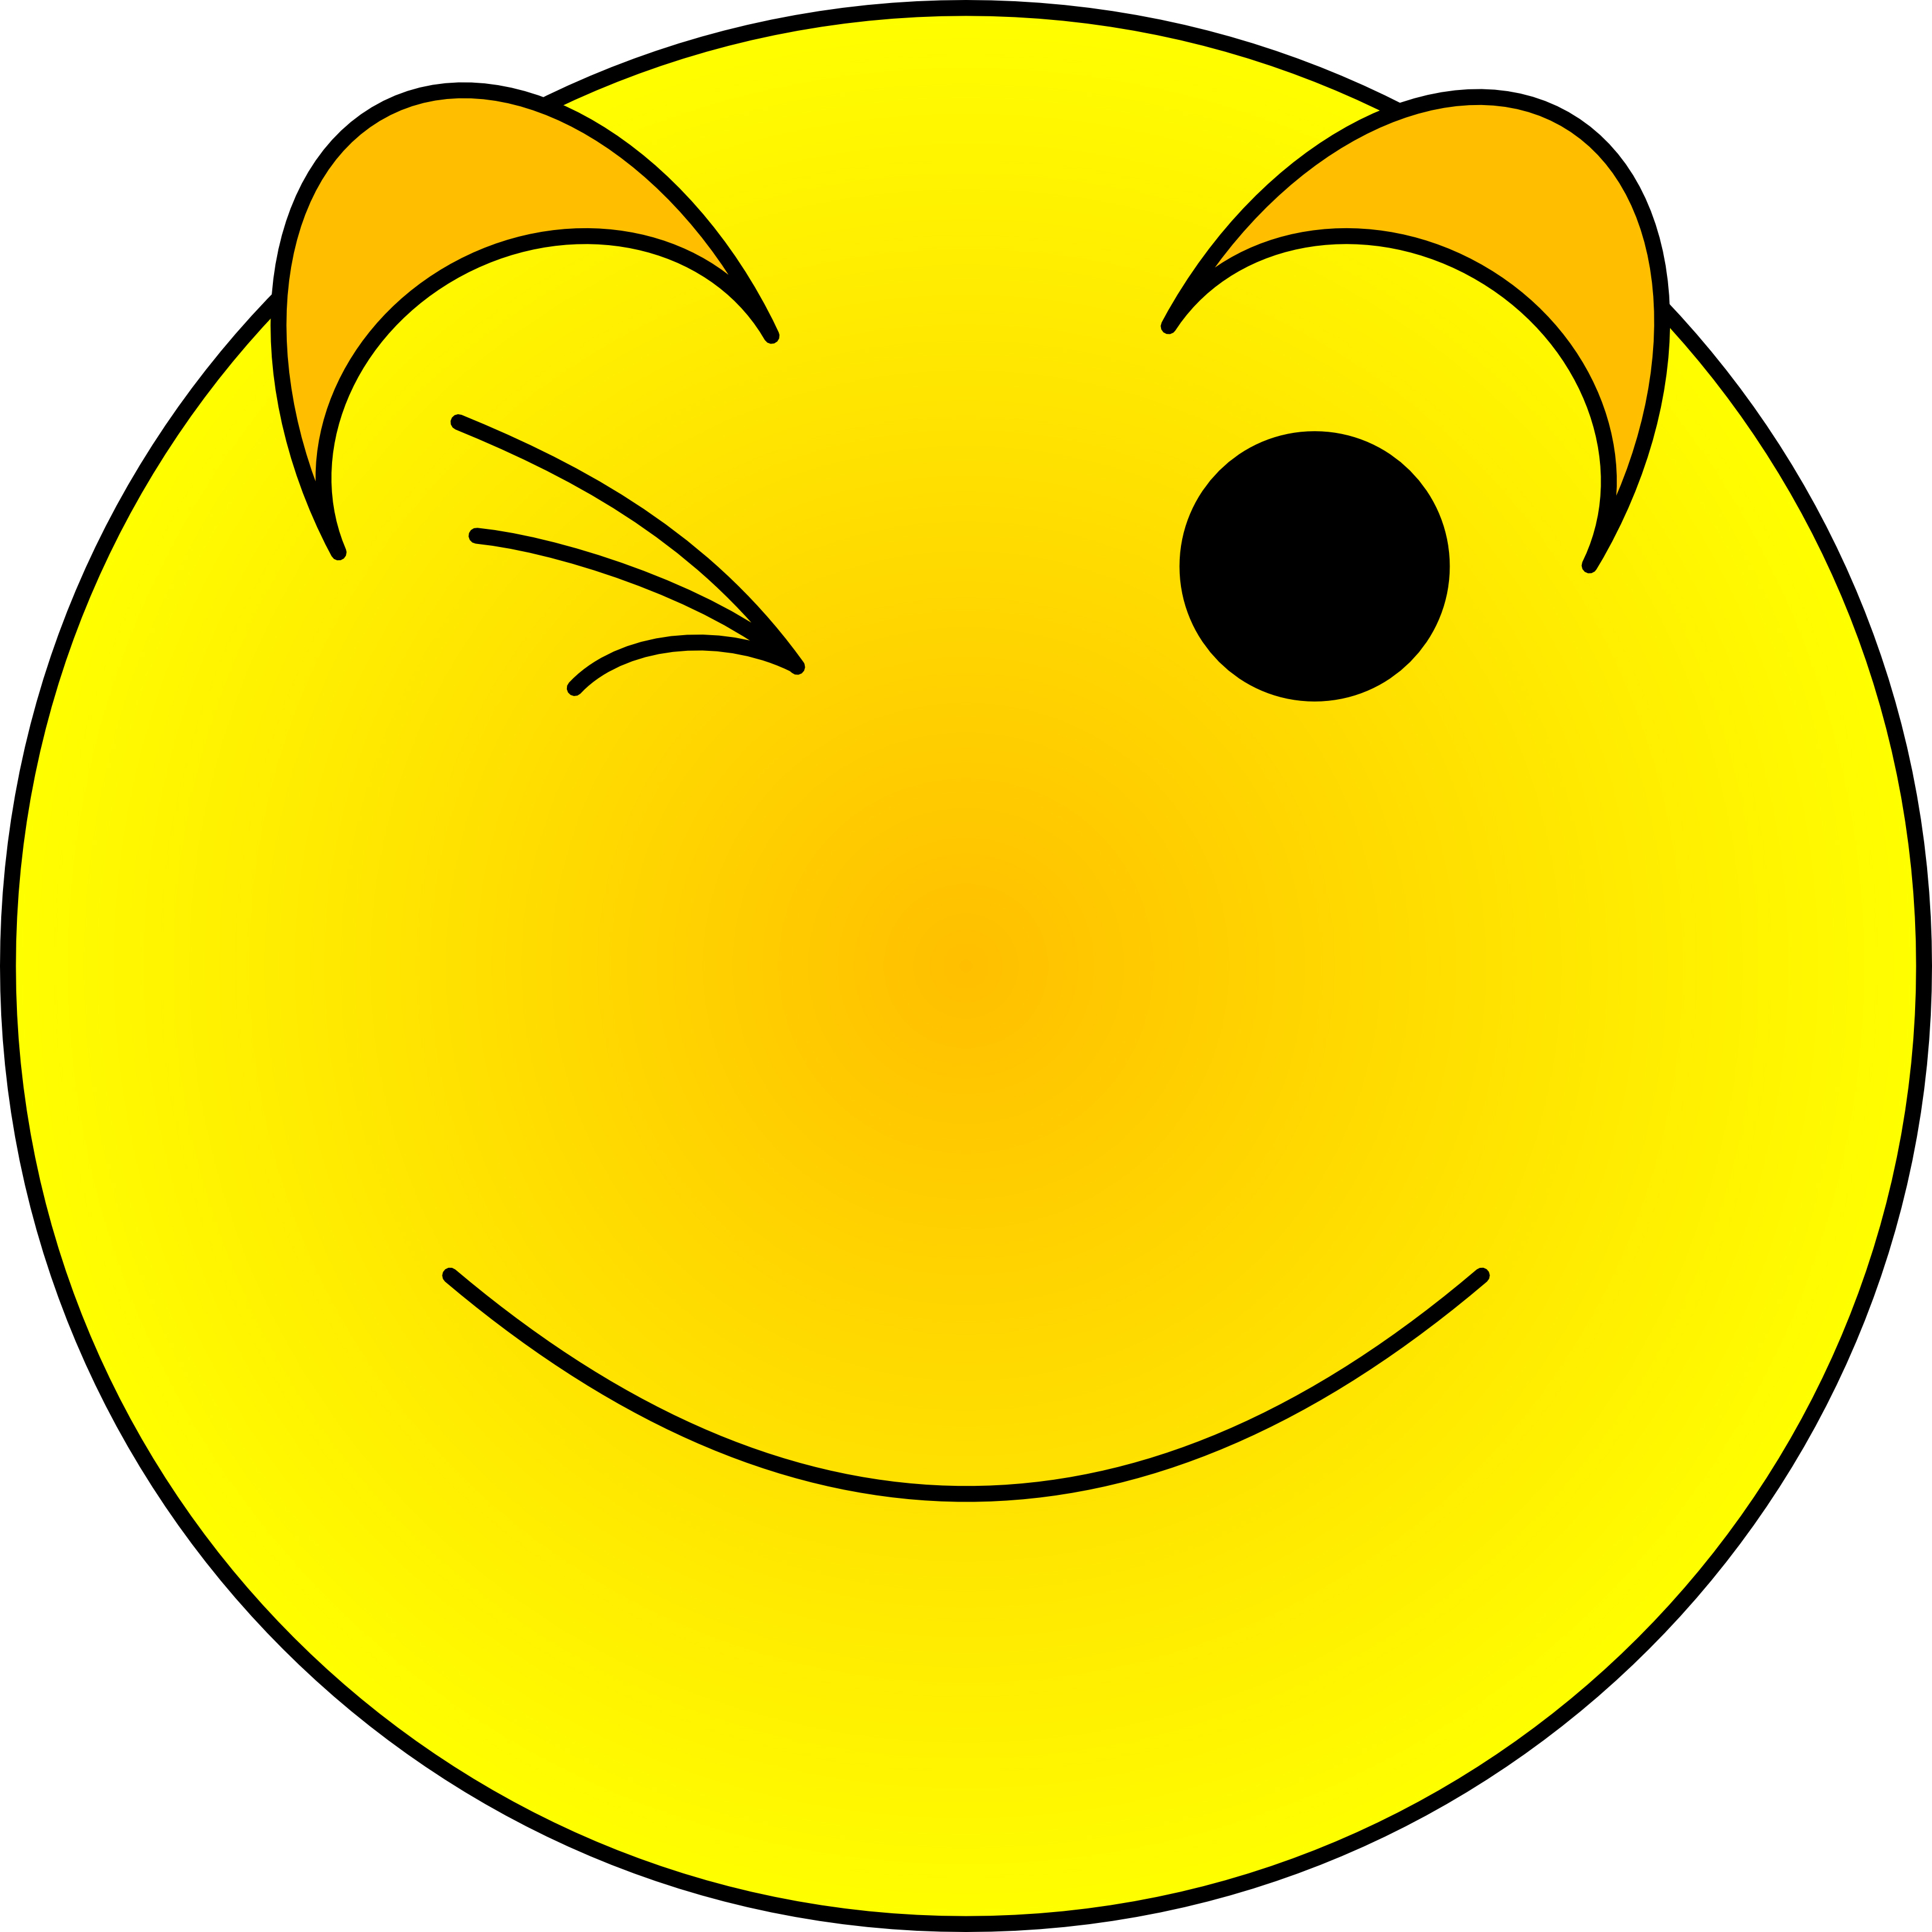 Smiley face graphics free clipart